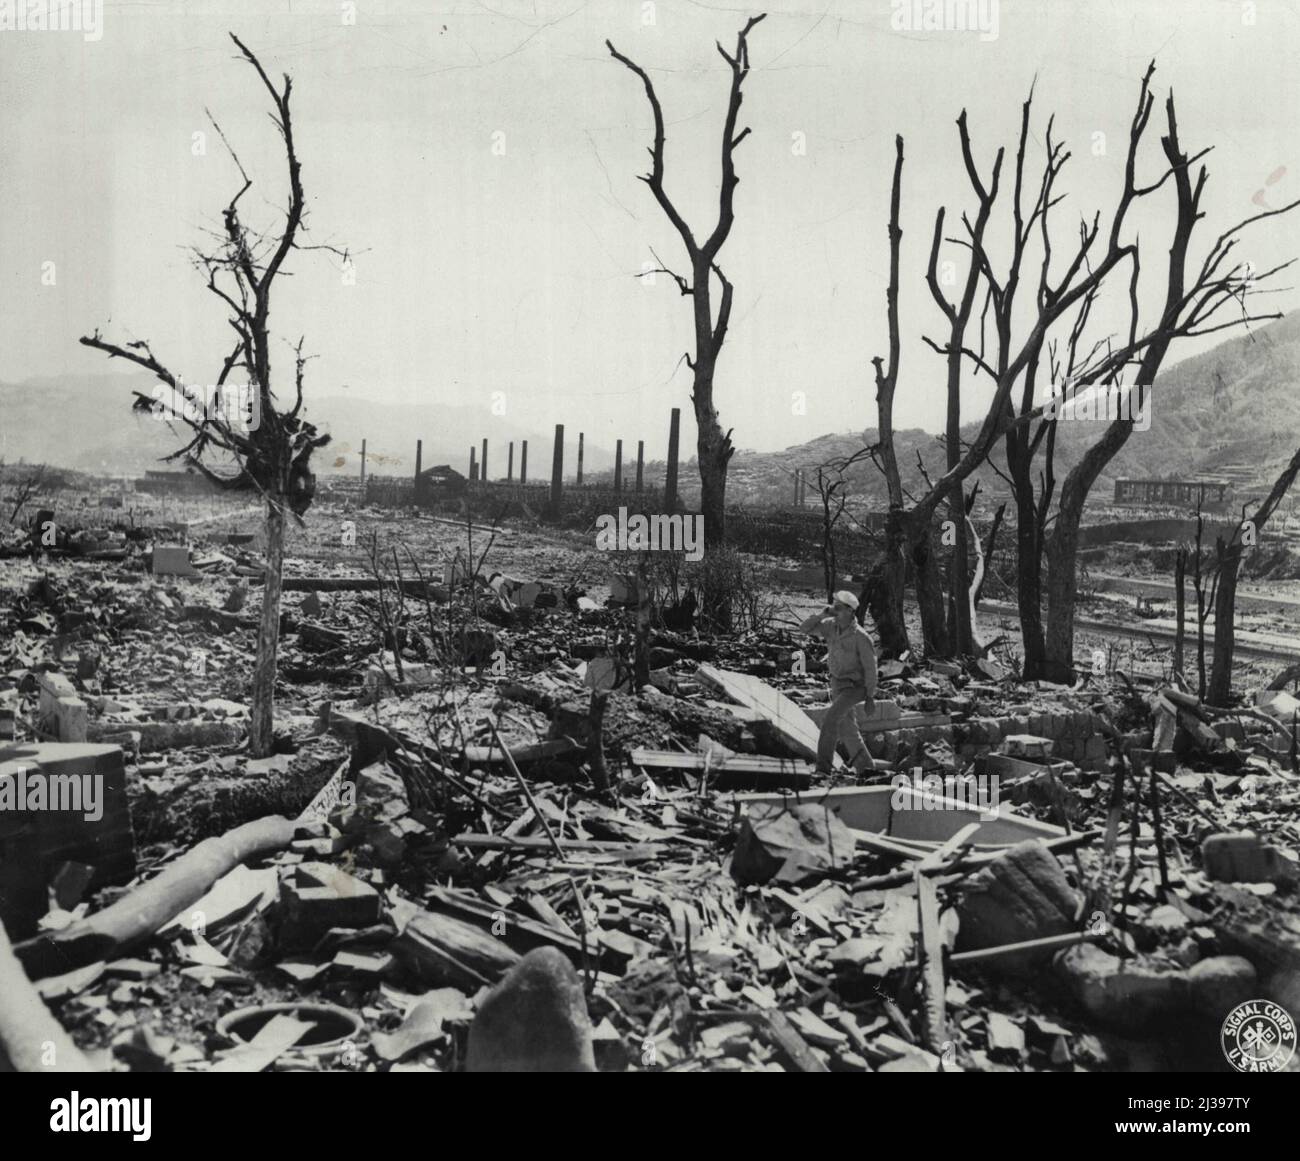 Top: Fat Man - the Plutonium-core atomic bomb which was exploded over Nagasaki. Above: The tortured remains of trees and rubble after the blast. October 09, 1945. (Photo by US Signal Corps Photo). Stock Photo